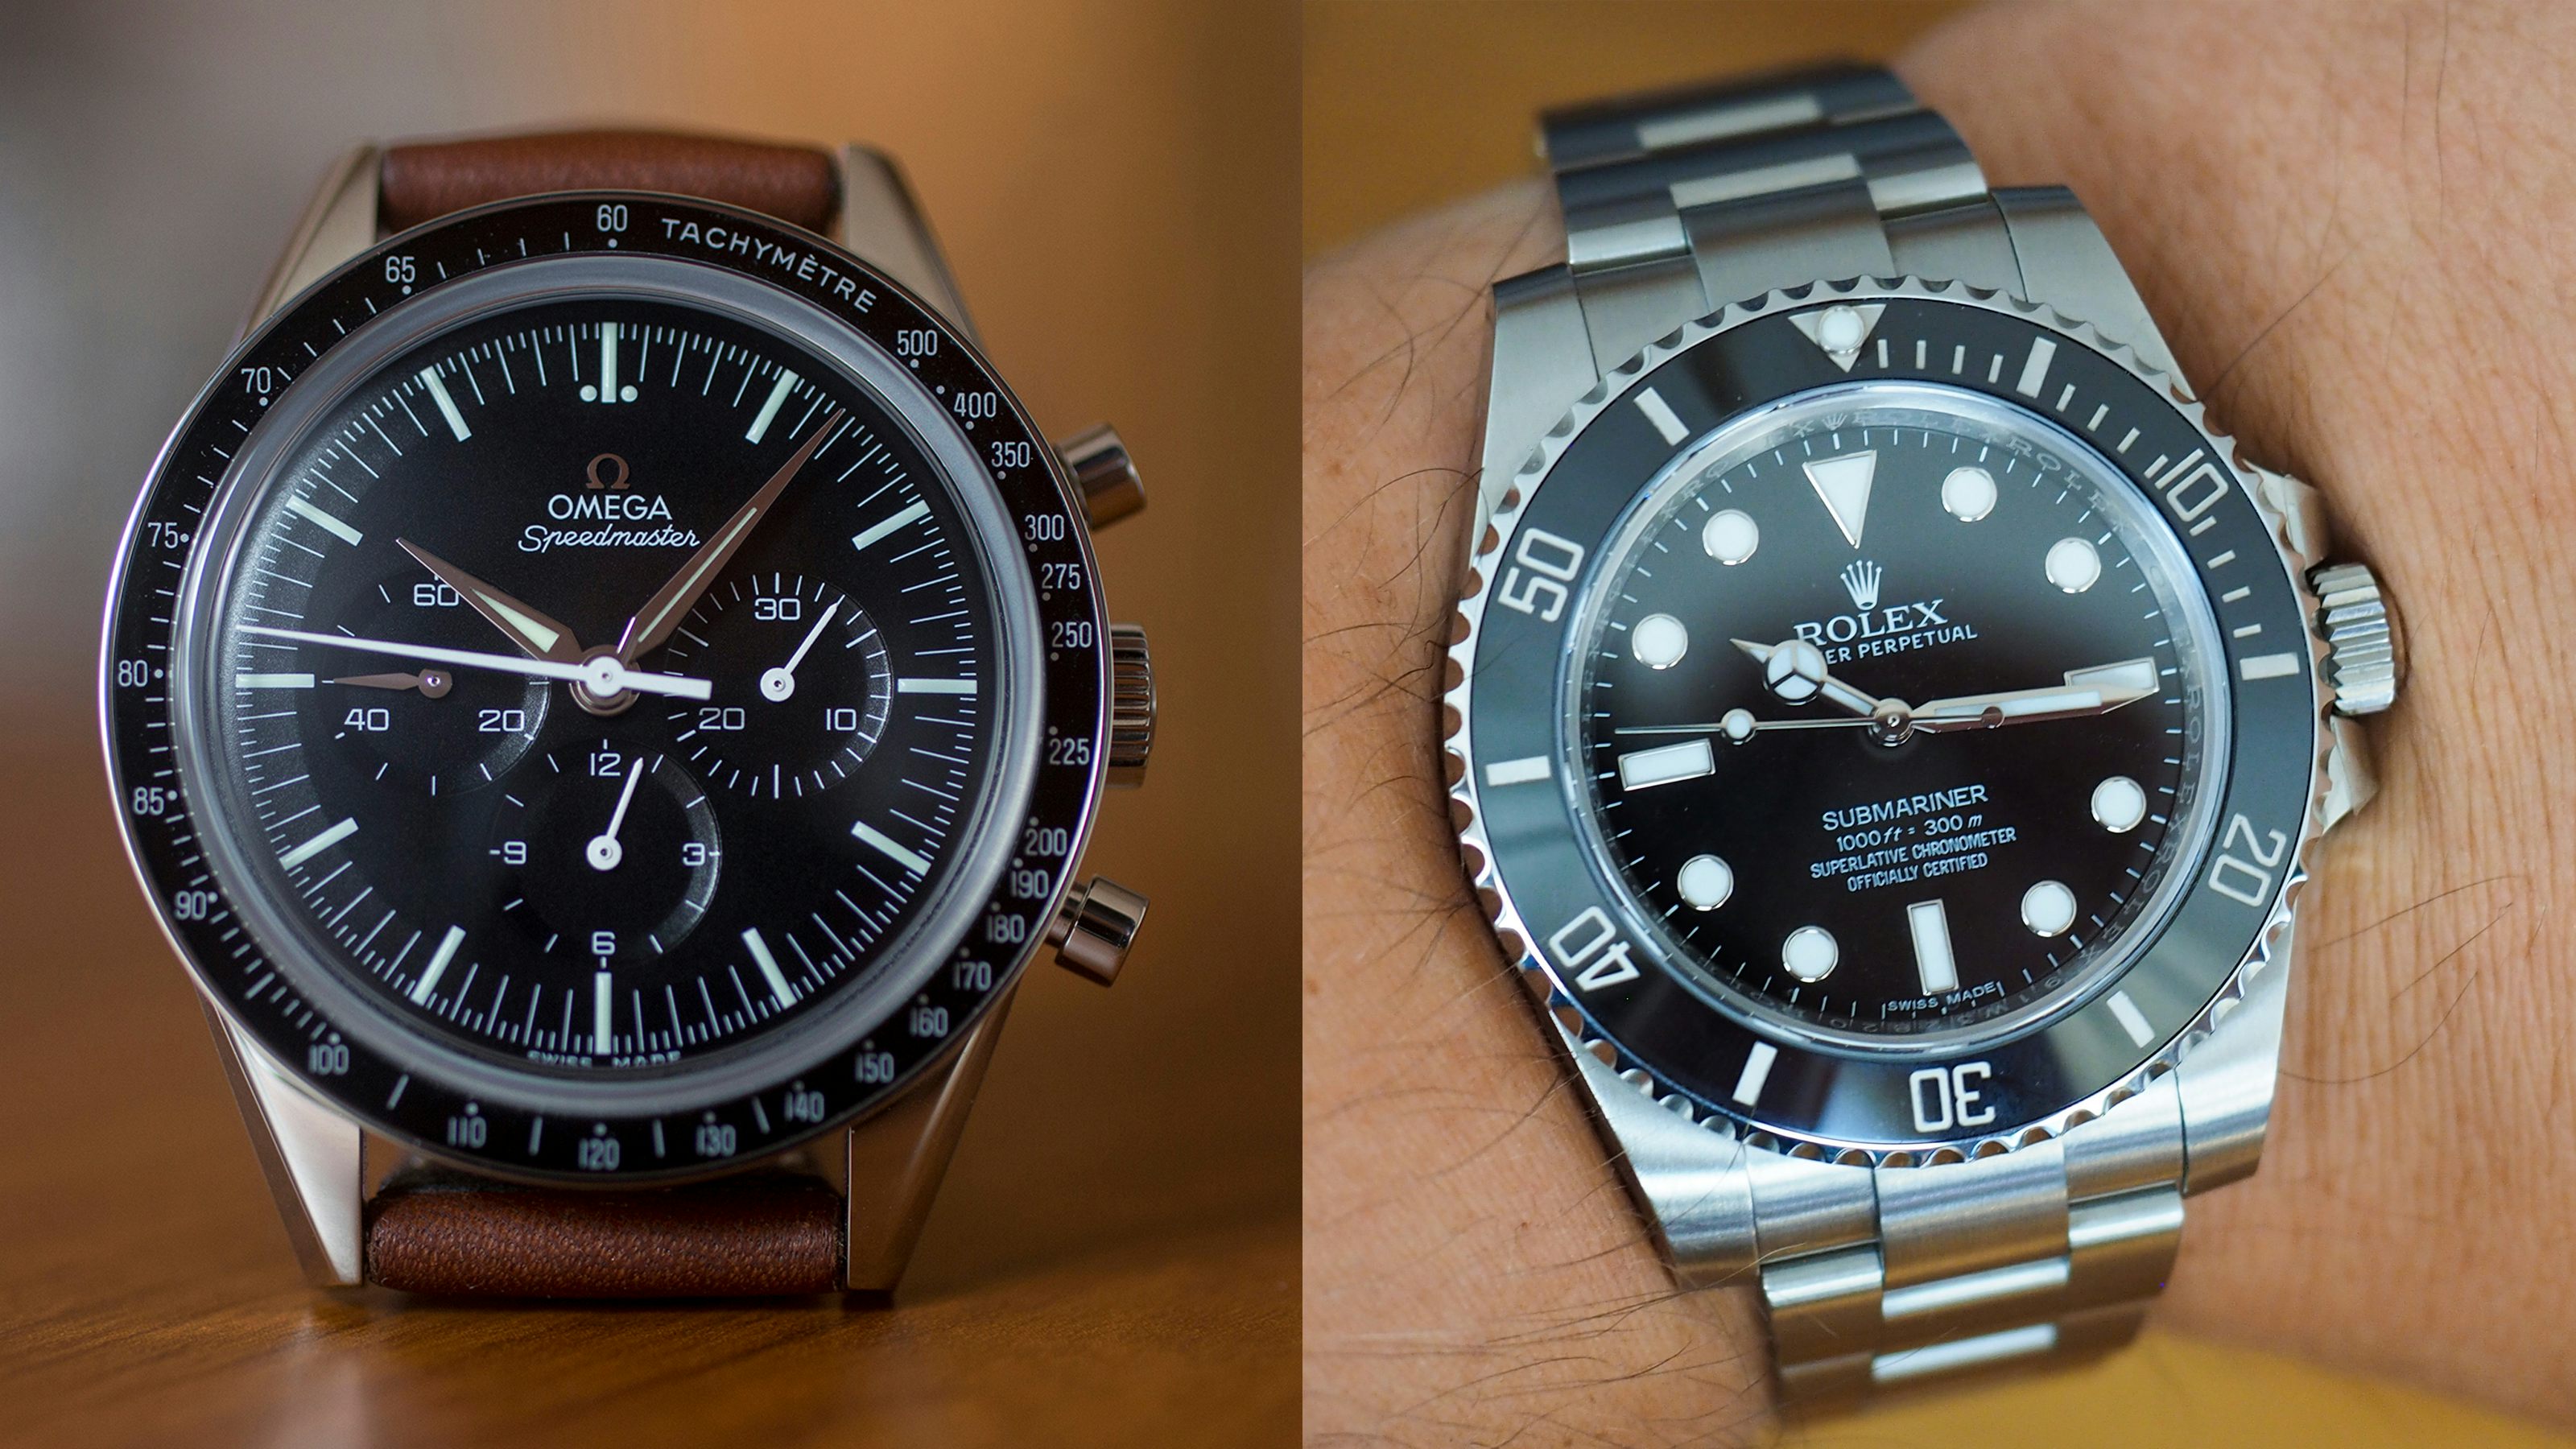 In-Depth: Chronograph Vs. Dive Watch: Which Is More Practical For